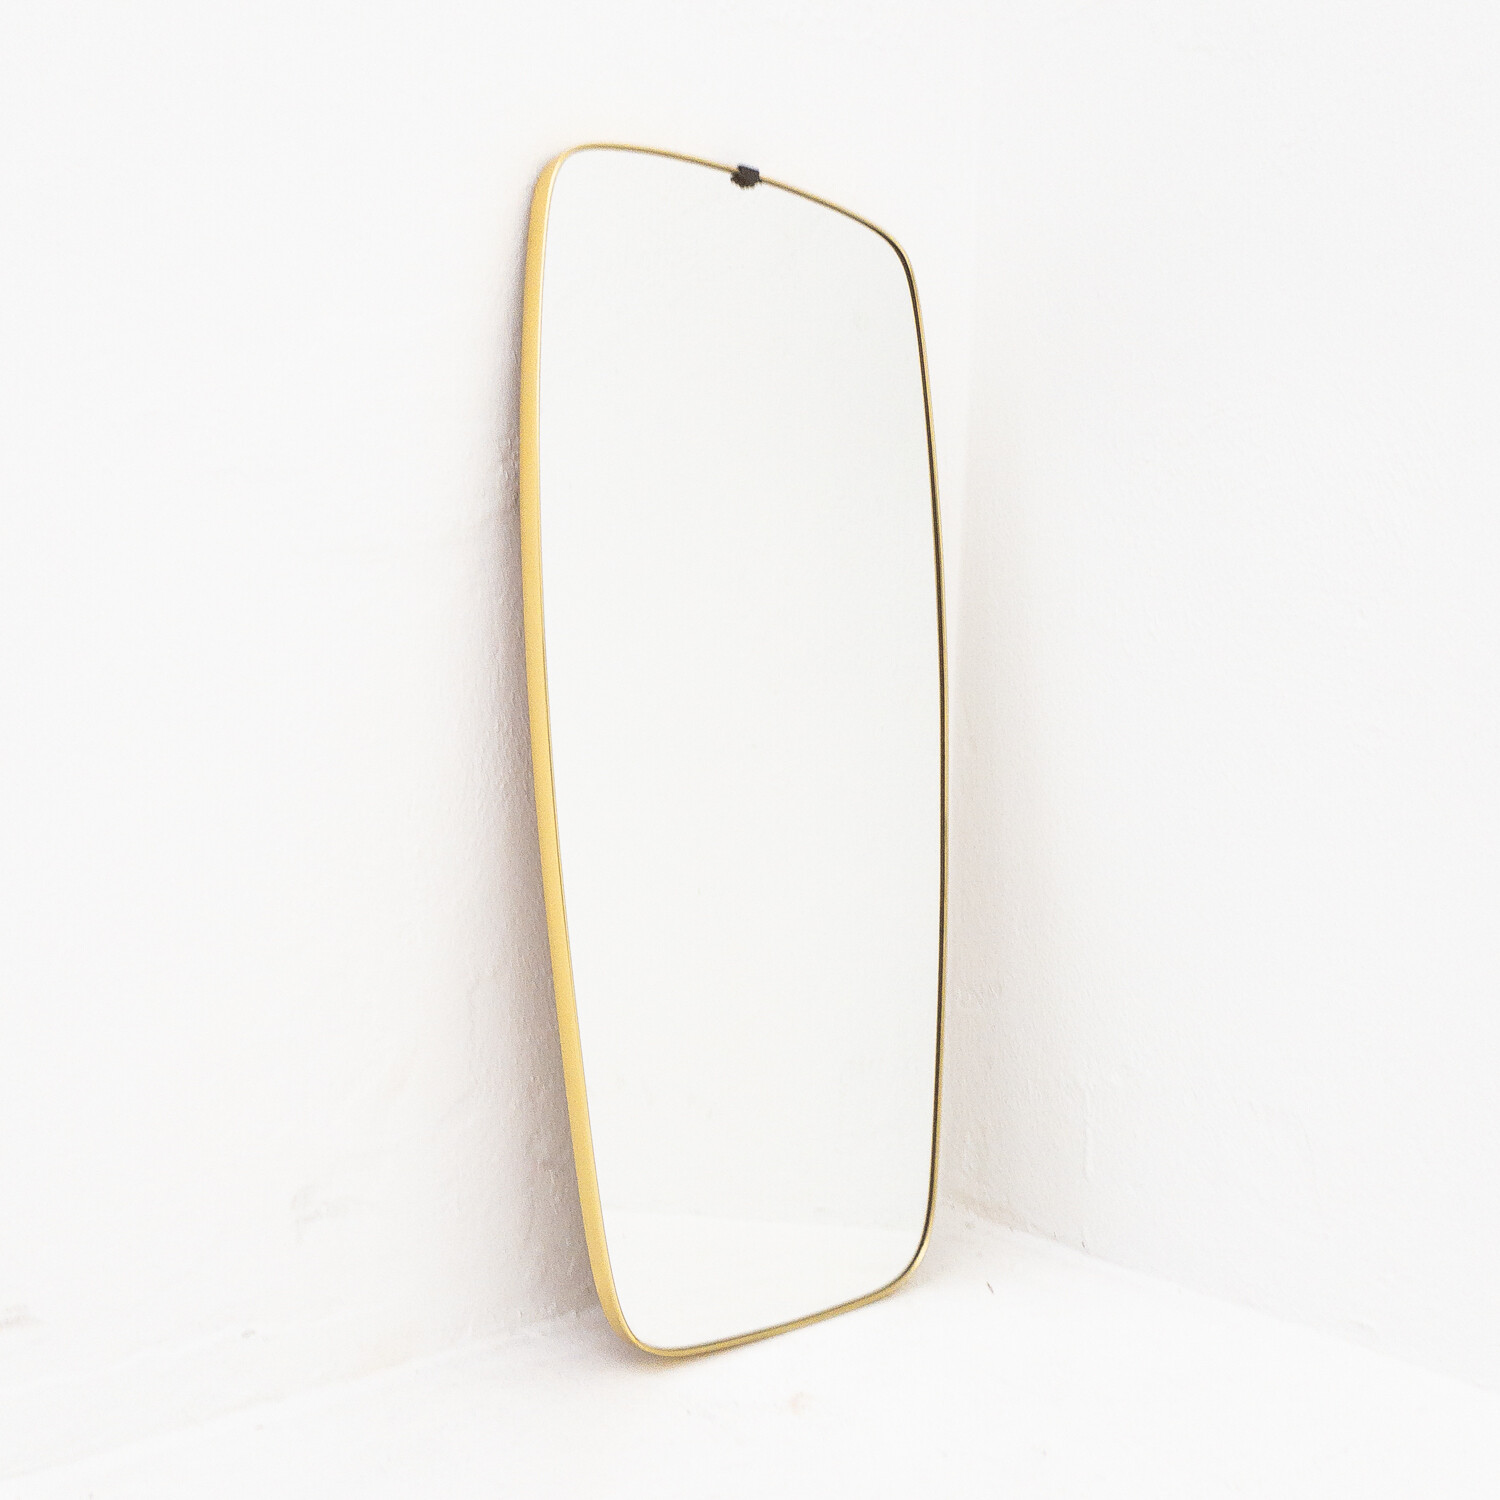 Oval mirror from the 60s